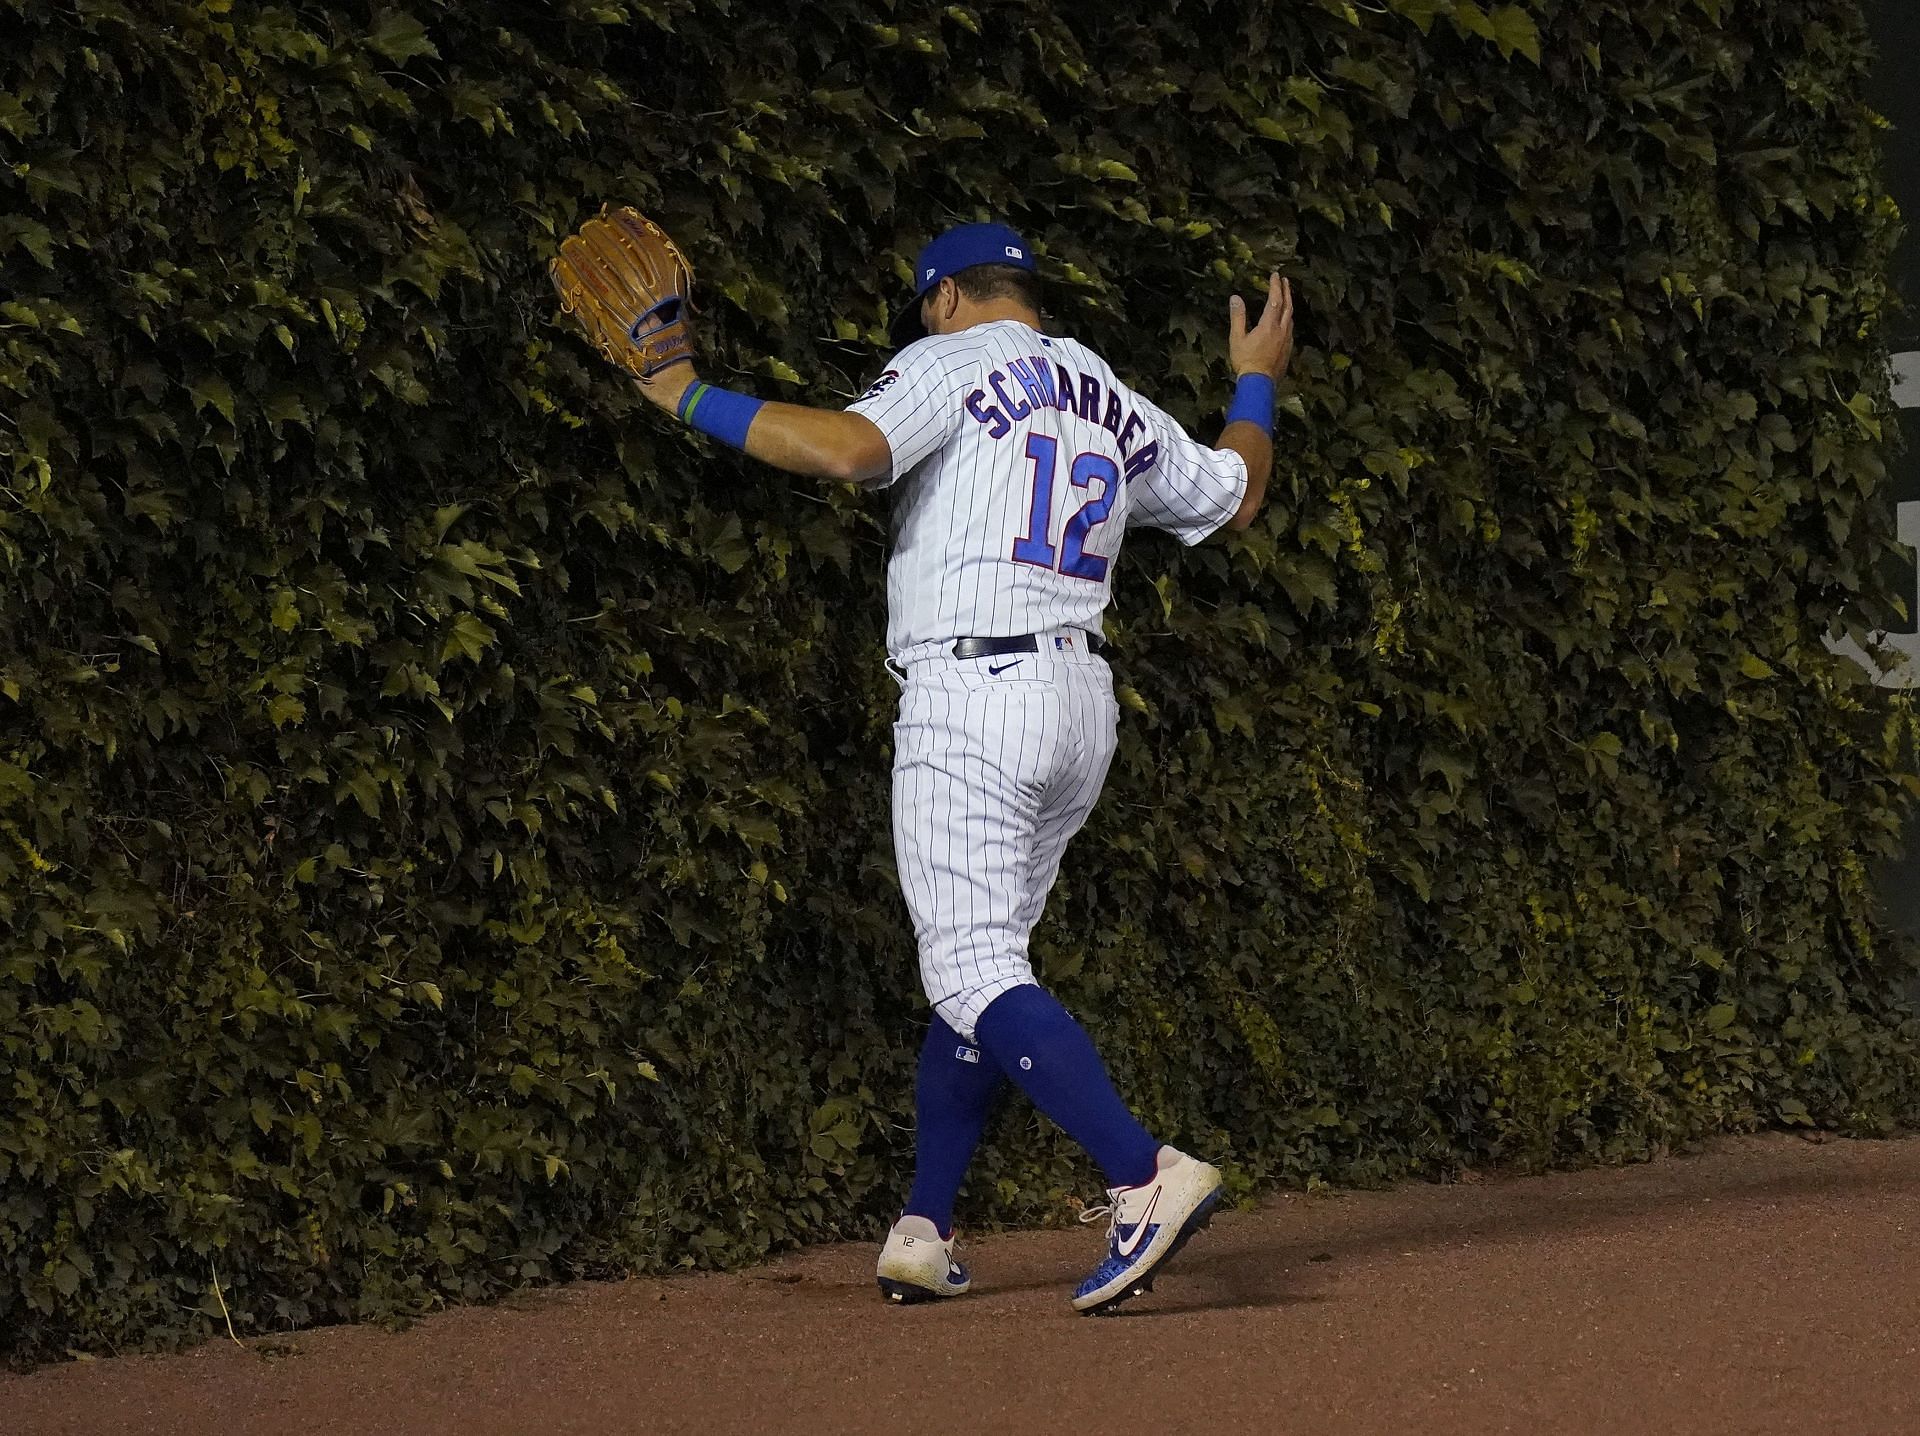 Cubs' Kyle Schwarber not ready to let go of catching dream – The Denver Post